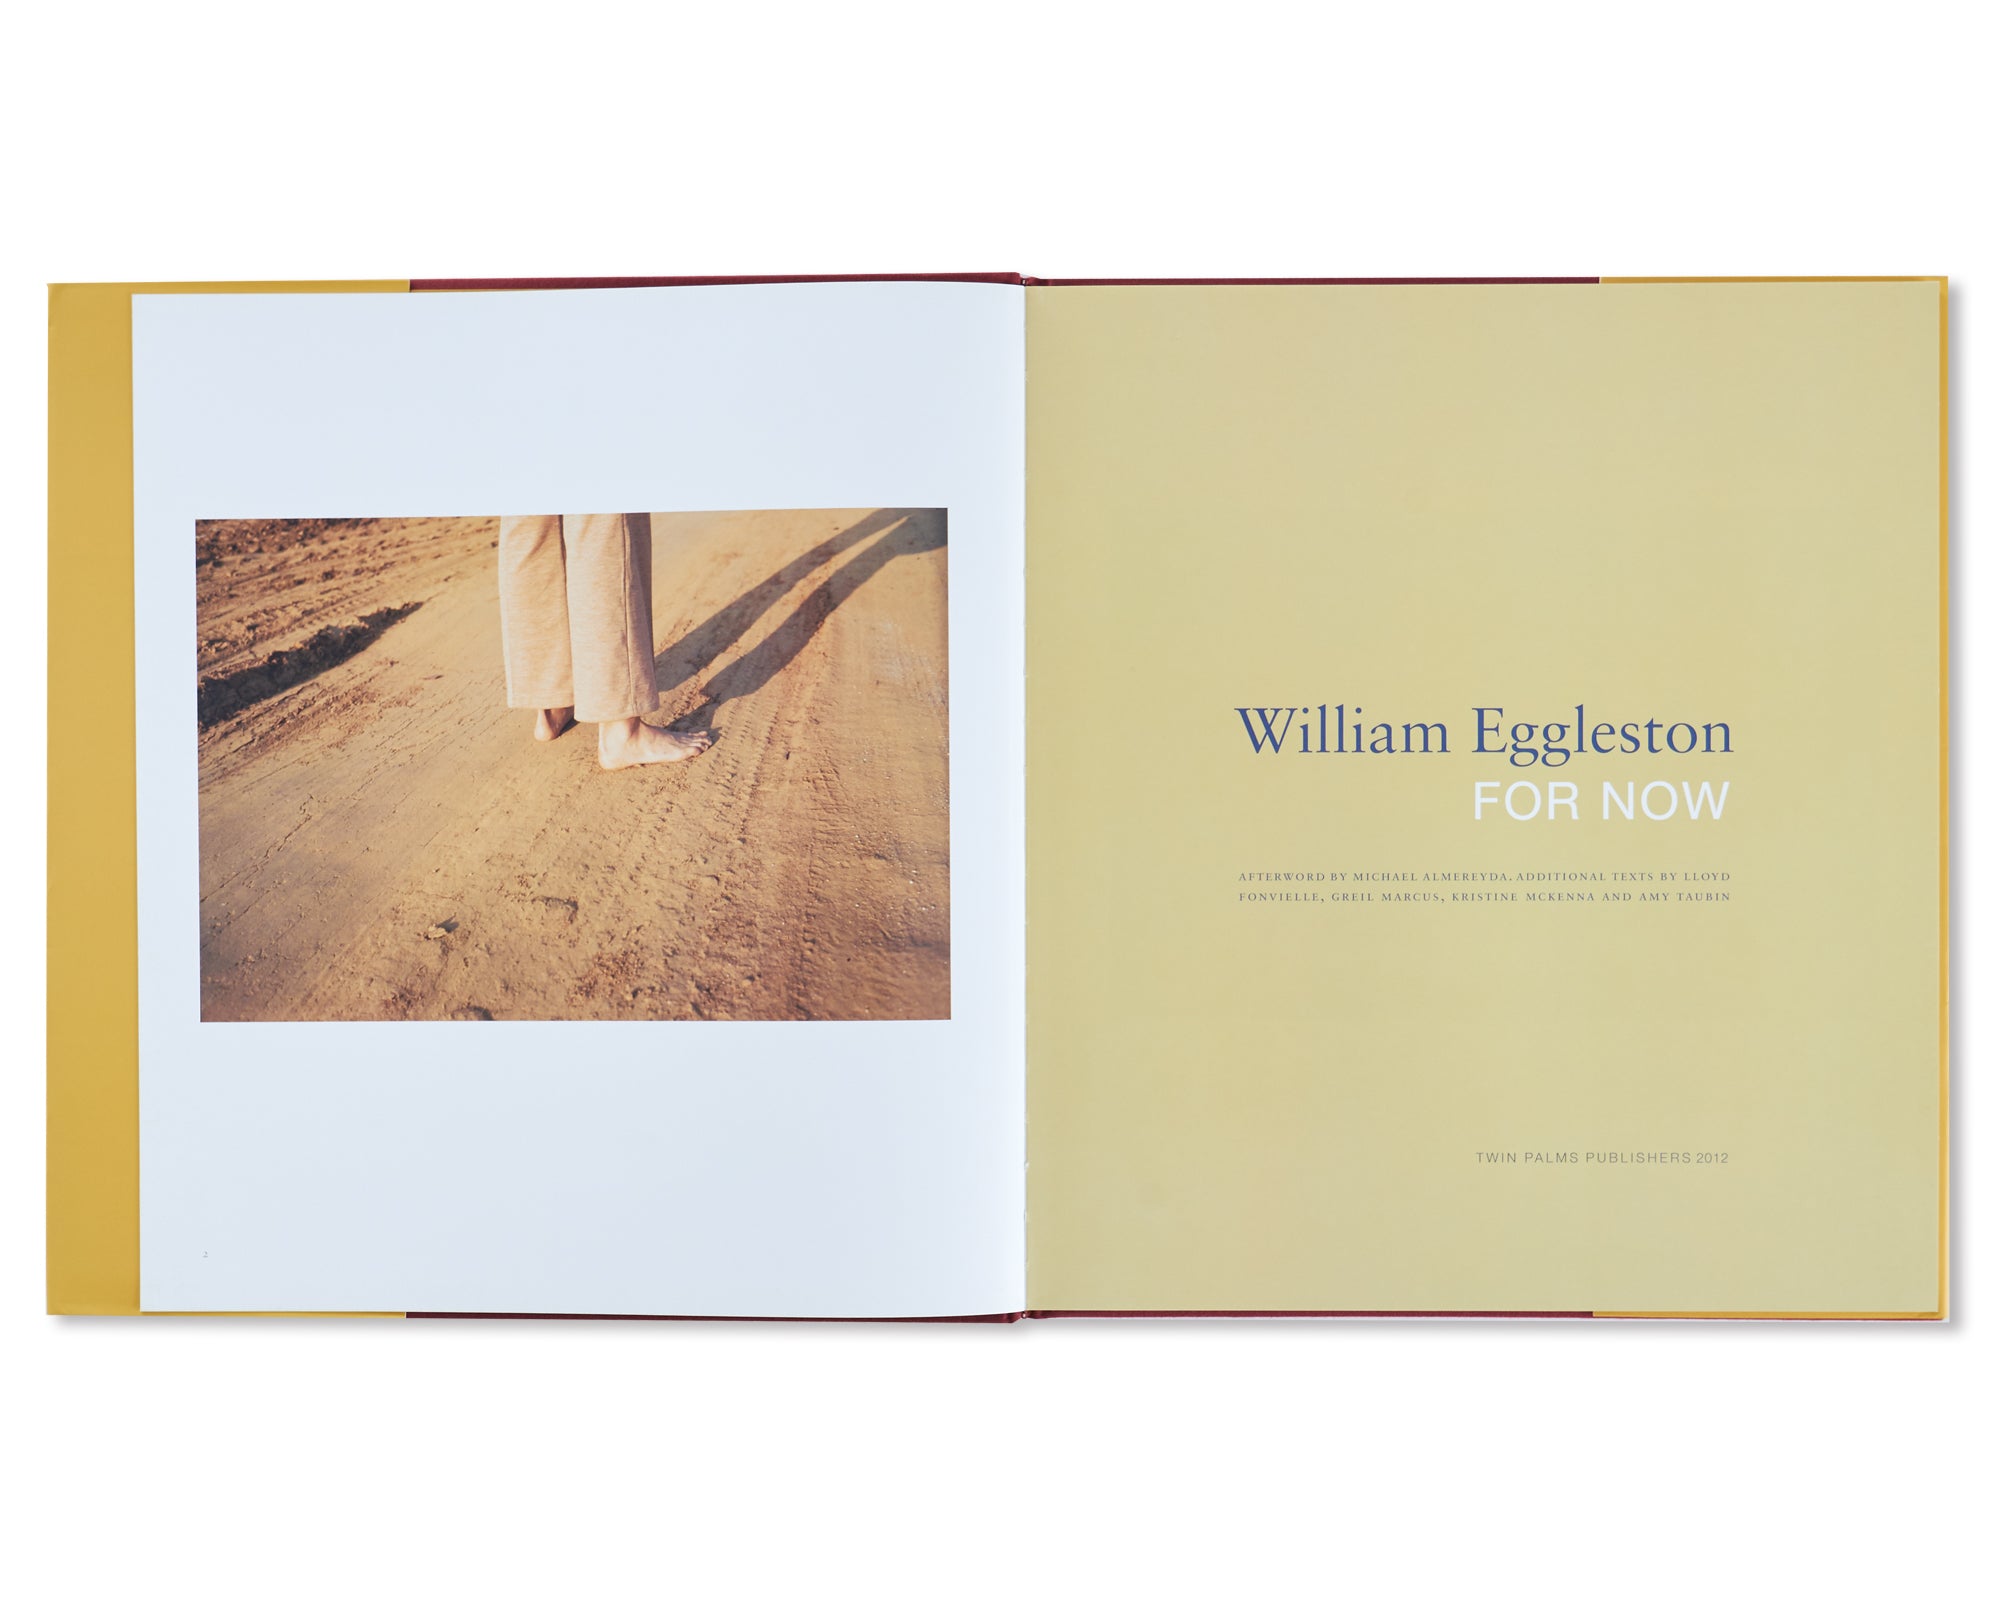 FOR NOW by William Eggleston